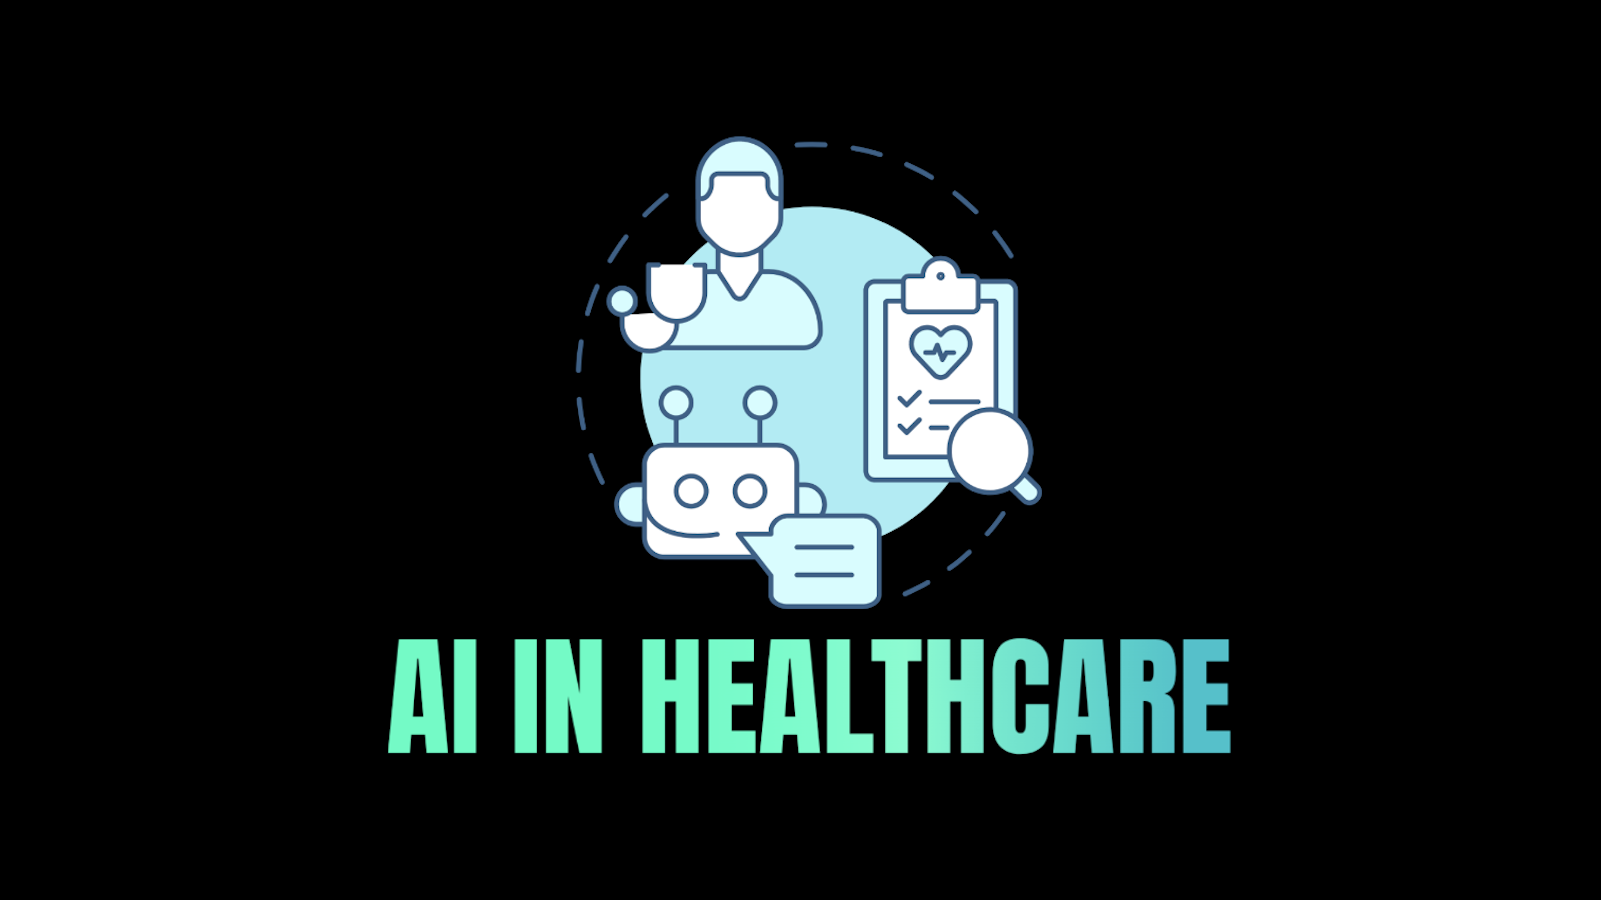 Green and Blue text that reads "AI in Healthcare"